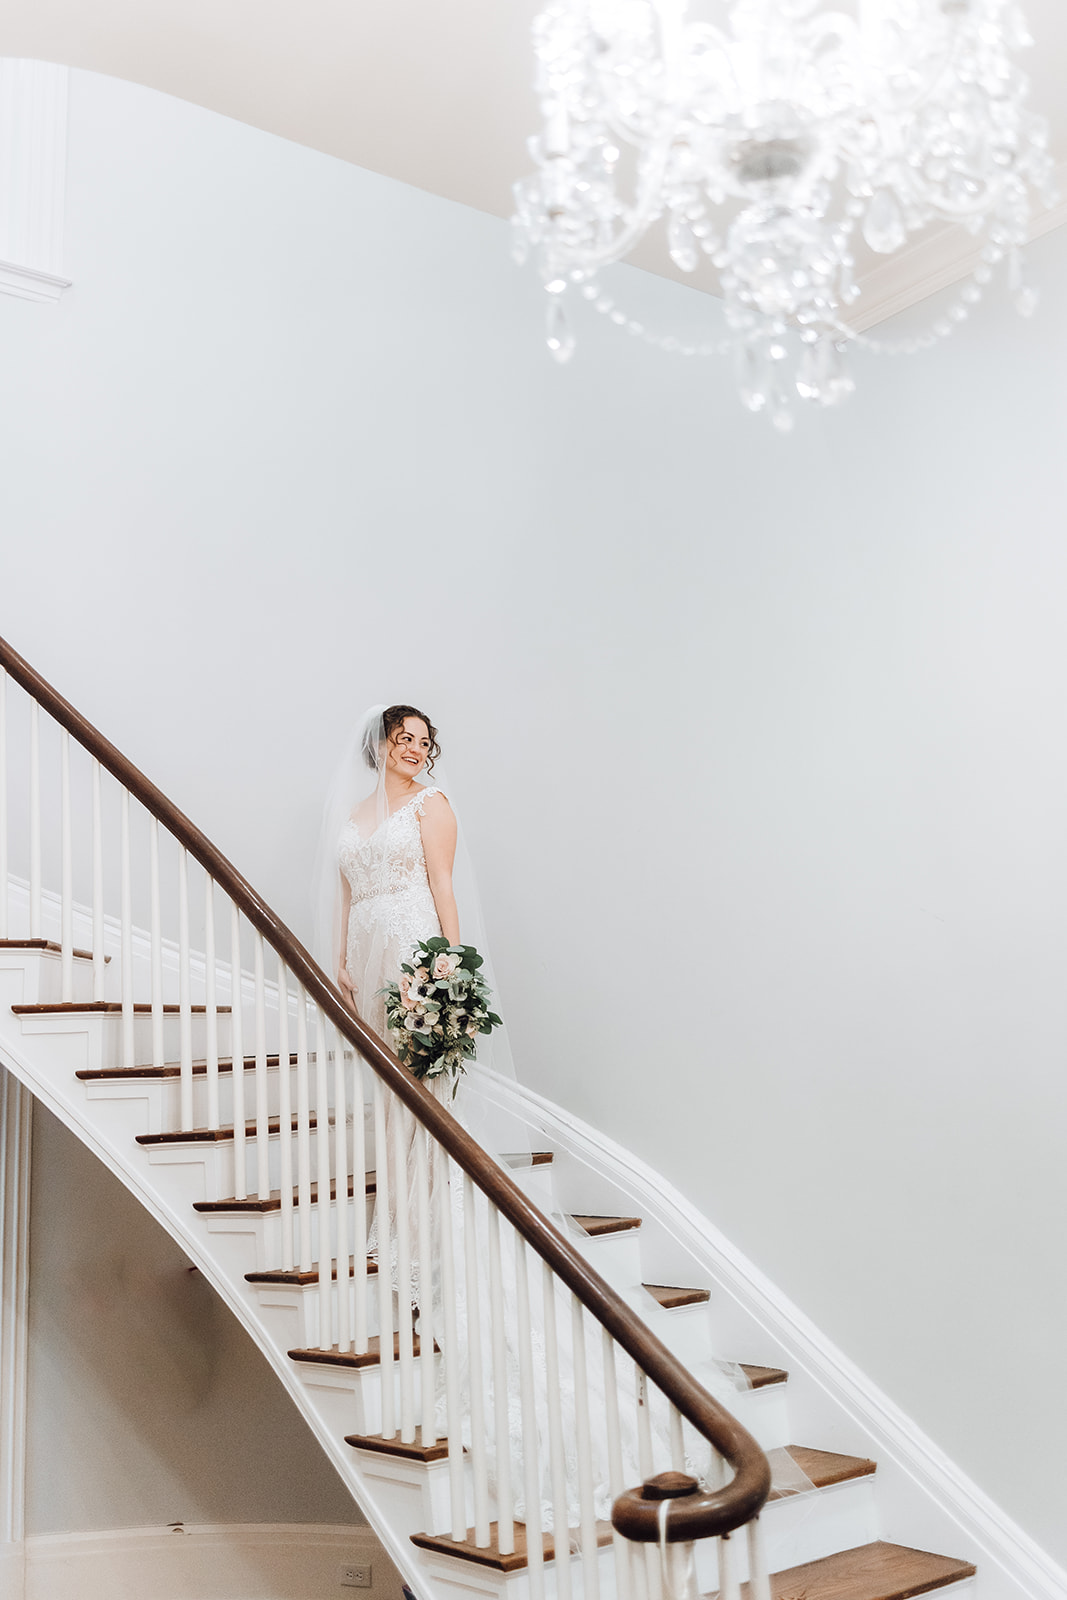 A bride looks over her shoulder while walking up a large curved wooden staircase in a lace dress Ravenswood Mansion